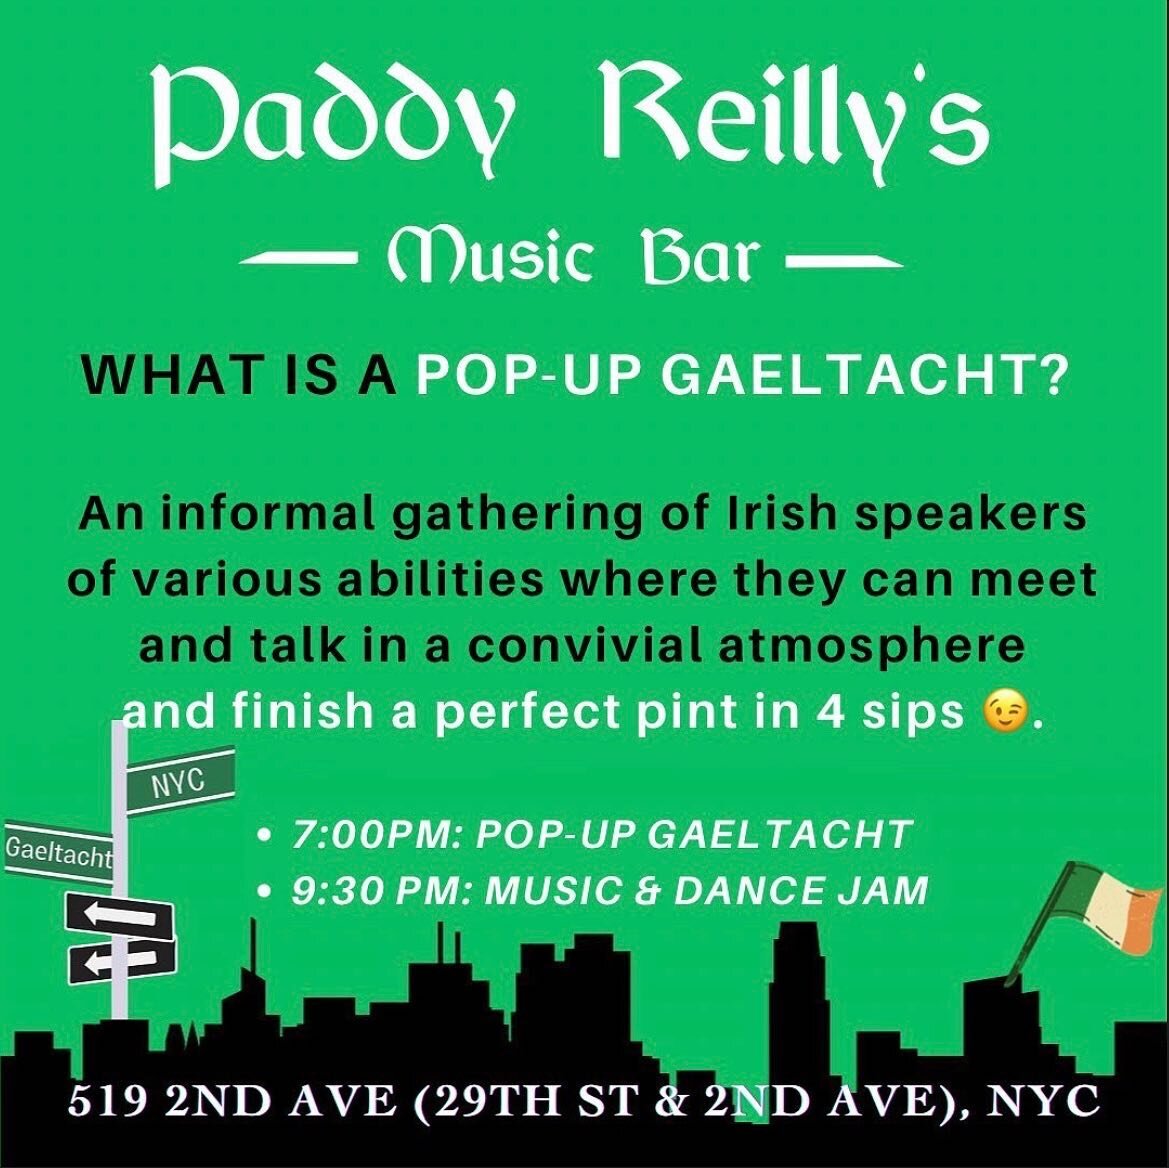 ☘️ Join GAELTACHT NYC this Wednesday, November 1st at 7:30PM for a Pop-Up Gaeltacht hosted at the iconic Paddy Reilly&rsquo;s Music Bar! 🍻

Afterwards, stick around for the music and dance session at 9:30PM, hosted by our very own Niall O&rsquo;Lear